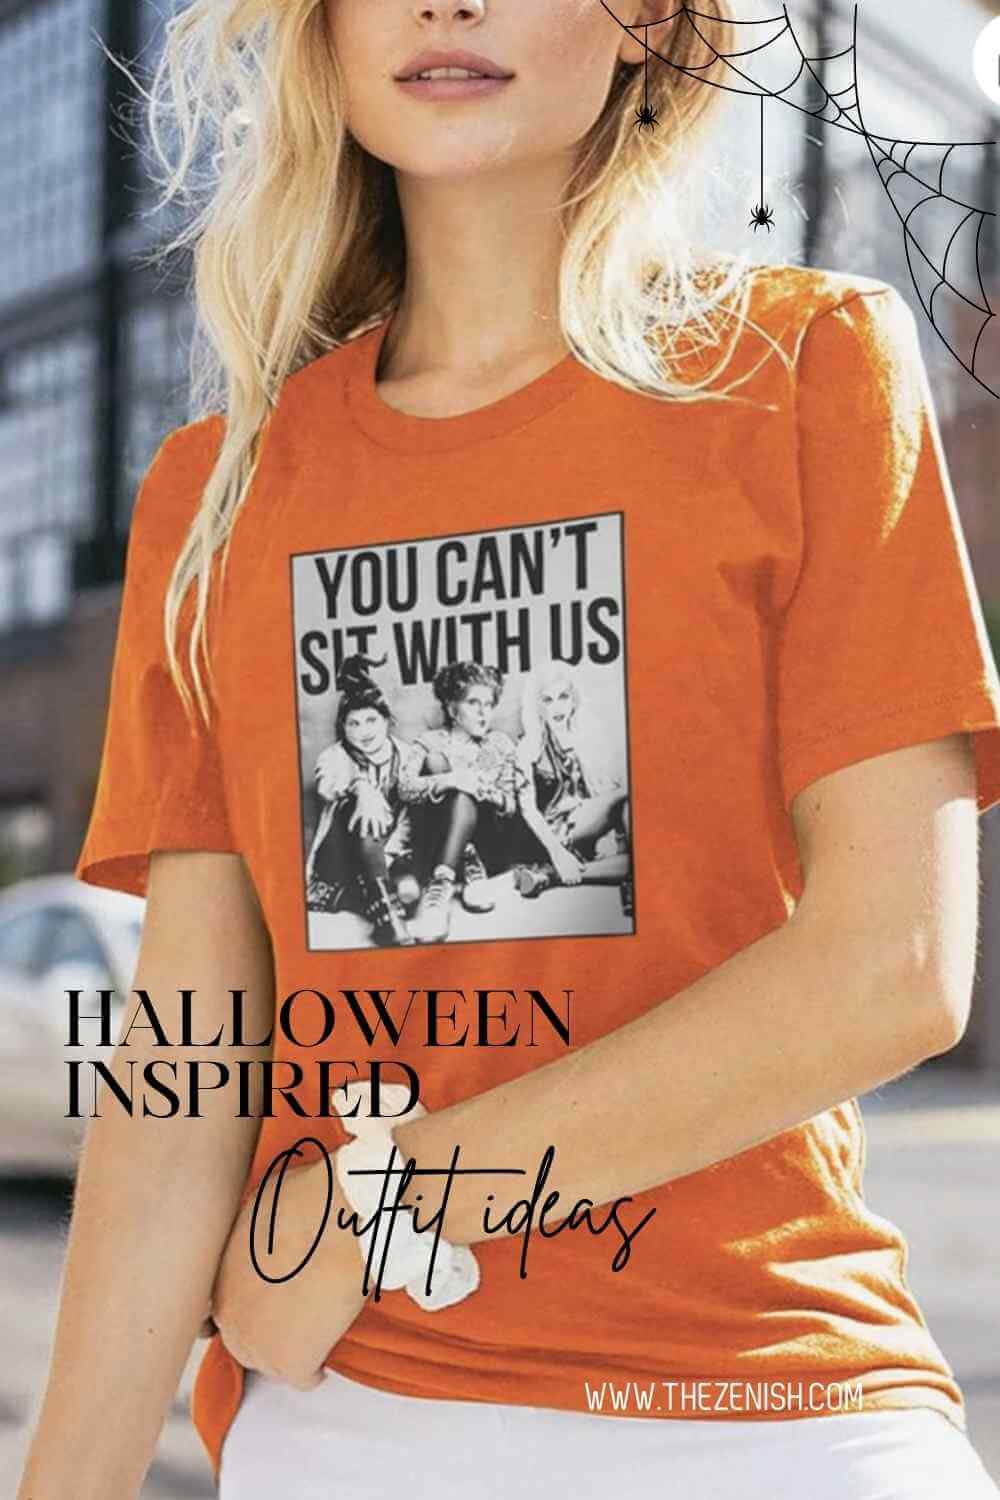 13 Spooktacular Halloween Inspired Outfit Ideas 13 13 Spooktacular Halloween Inspired Outfit Ideas